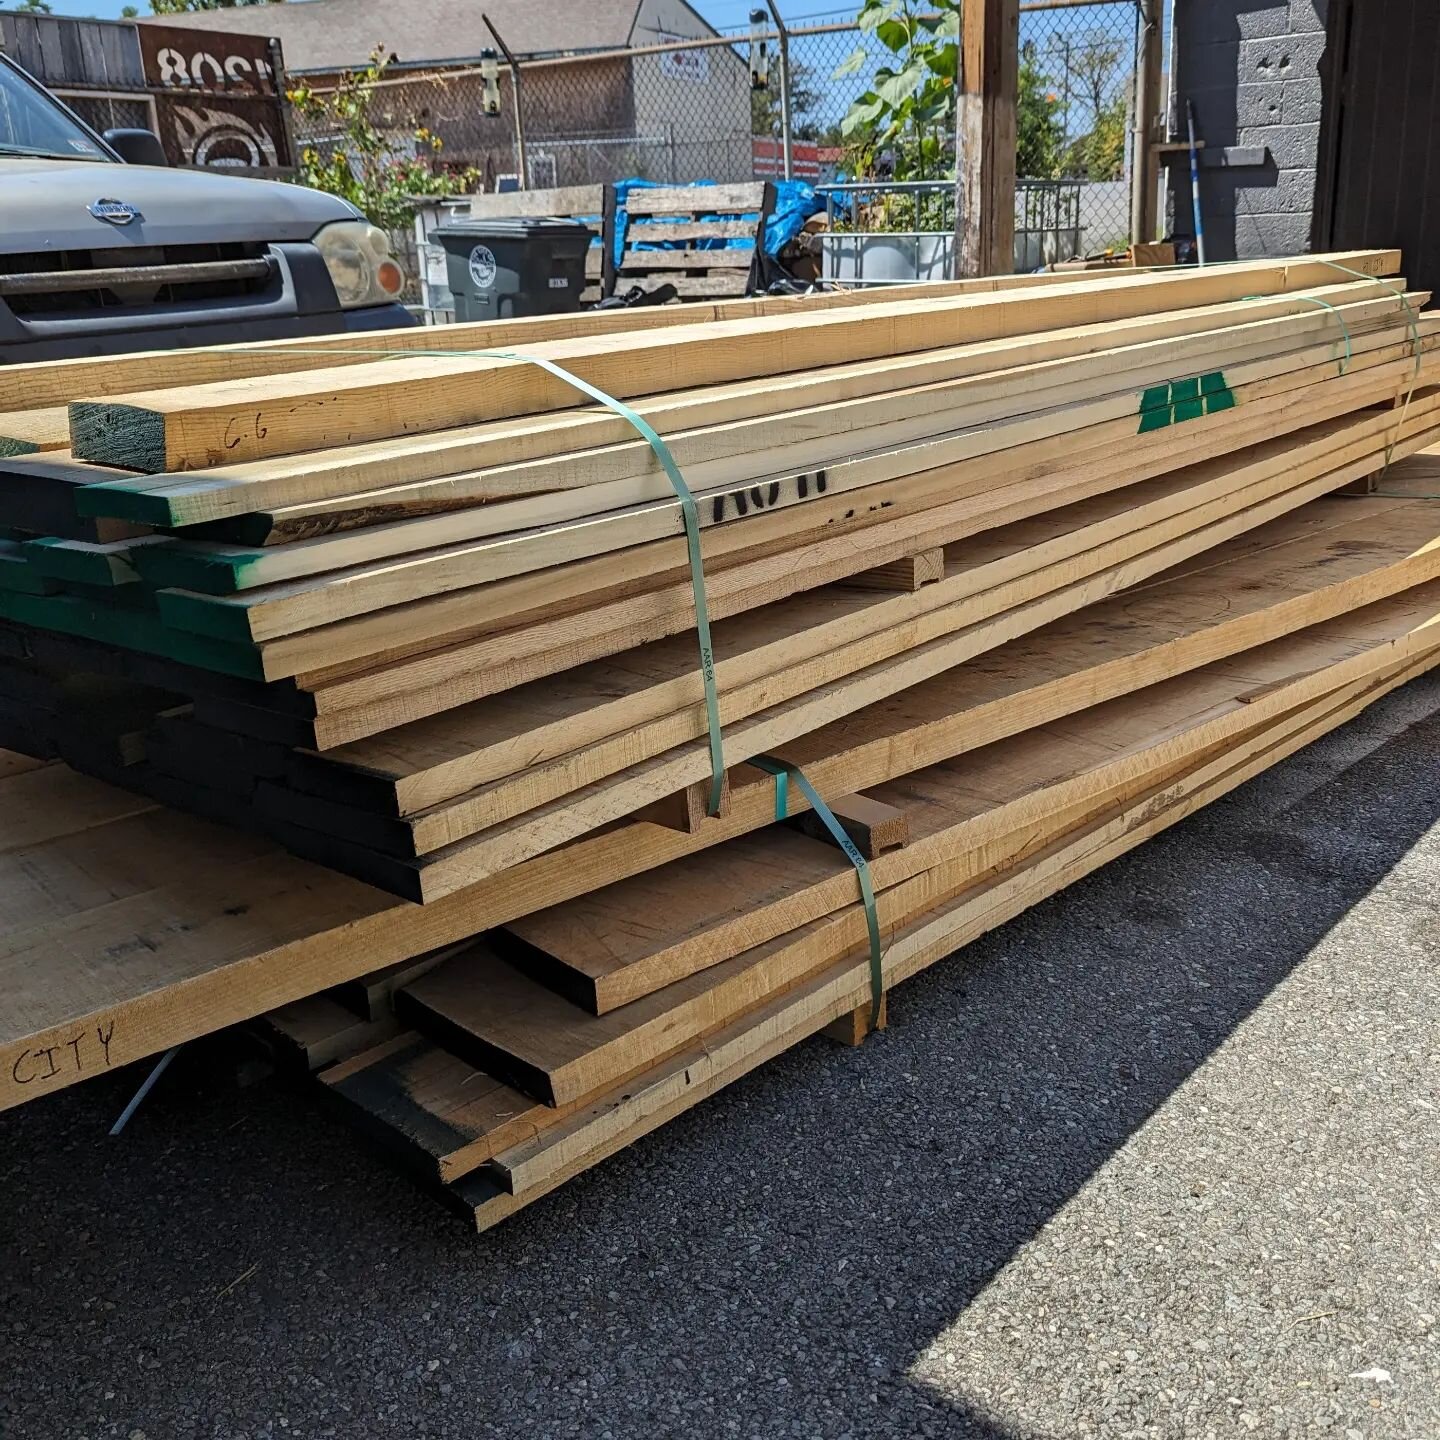 Great news!!

Got in some hard maple (4/4, 5/4, 6/4, 8/4) and red oak (4/4). Everything went down in price! Hard maple is within 35 cents of the price in the before-times.